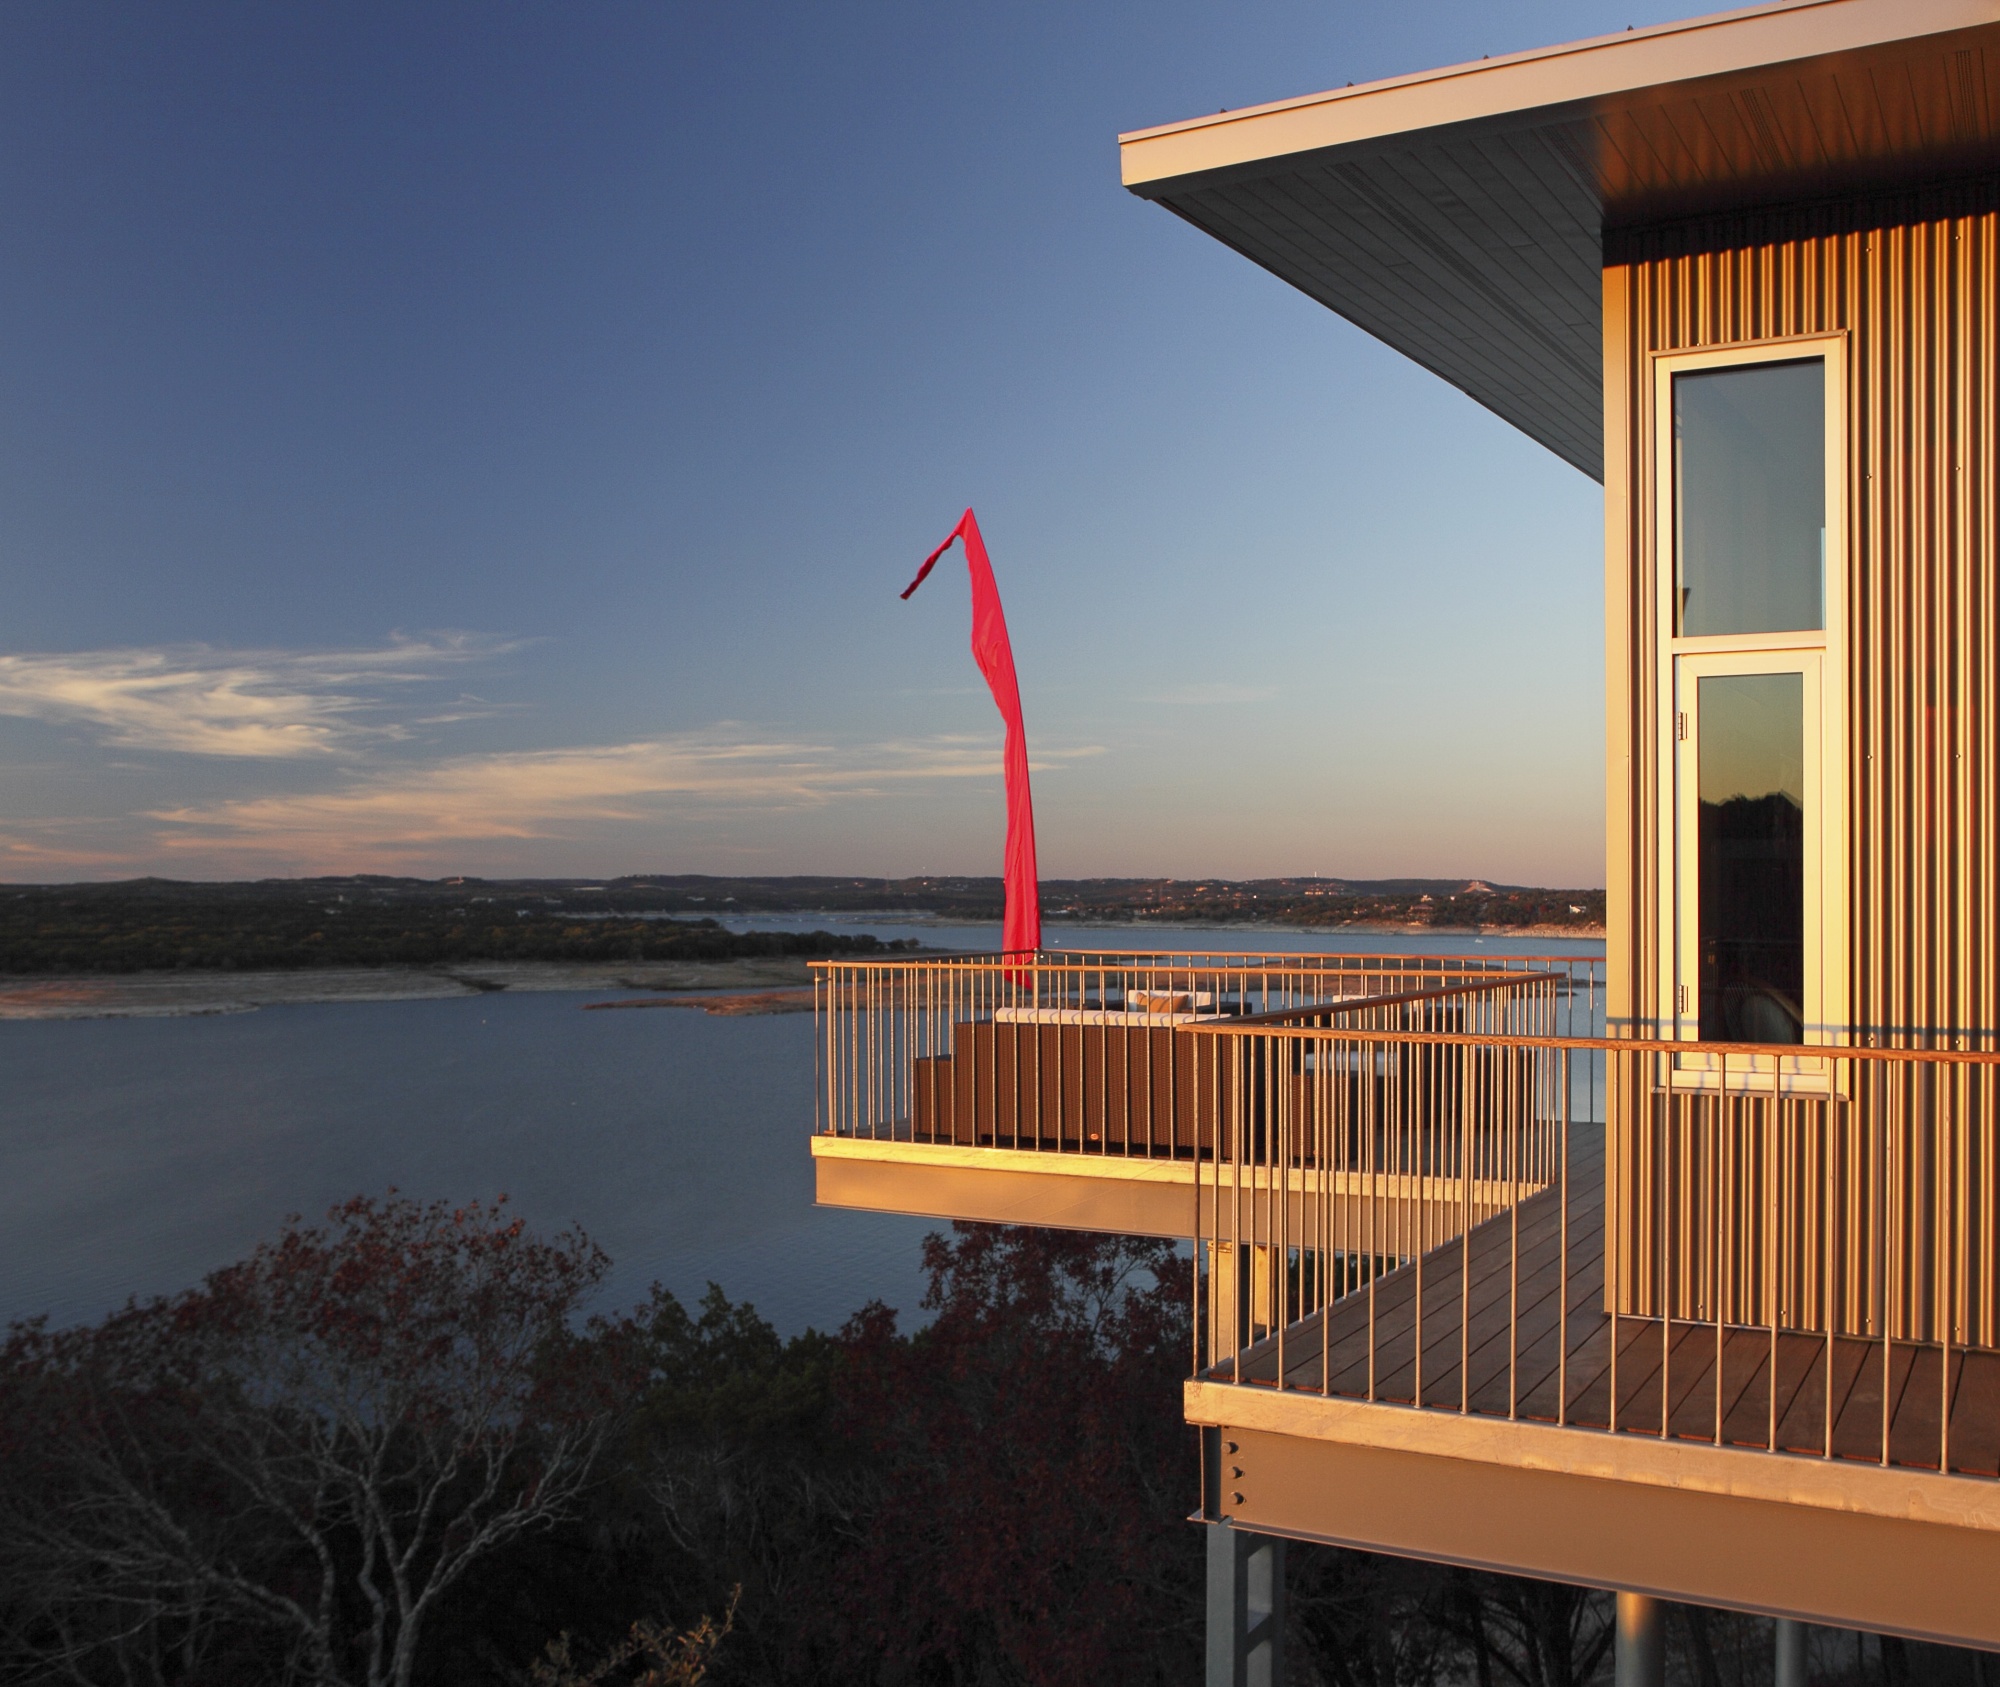 35 feet above the natural terrain provides for commanding views.